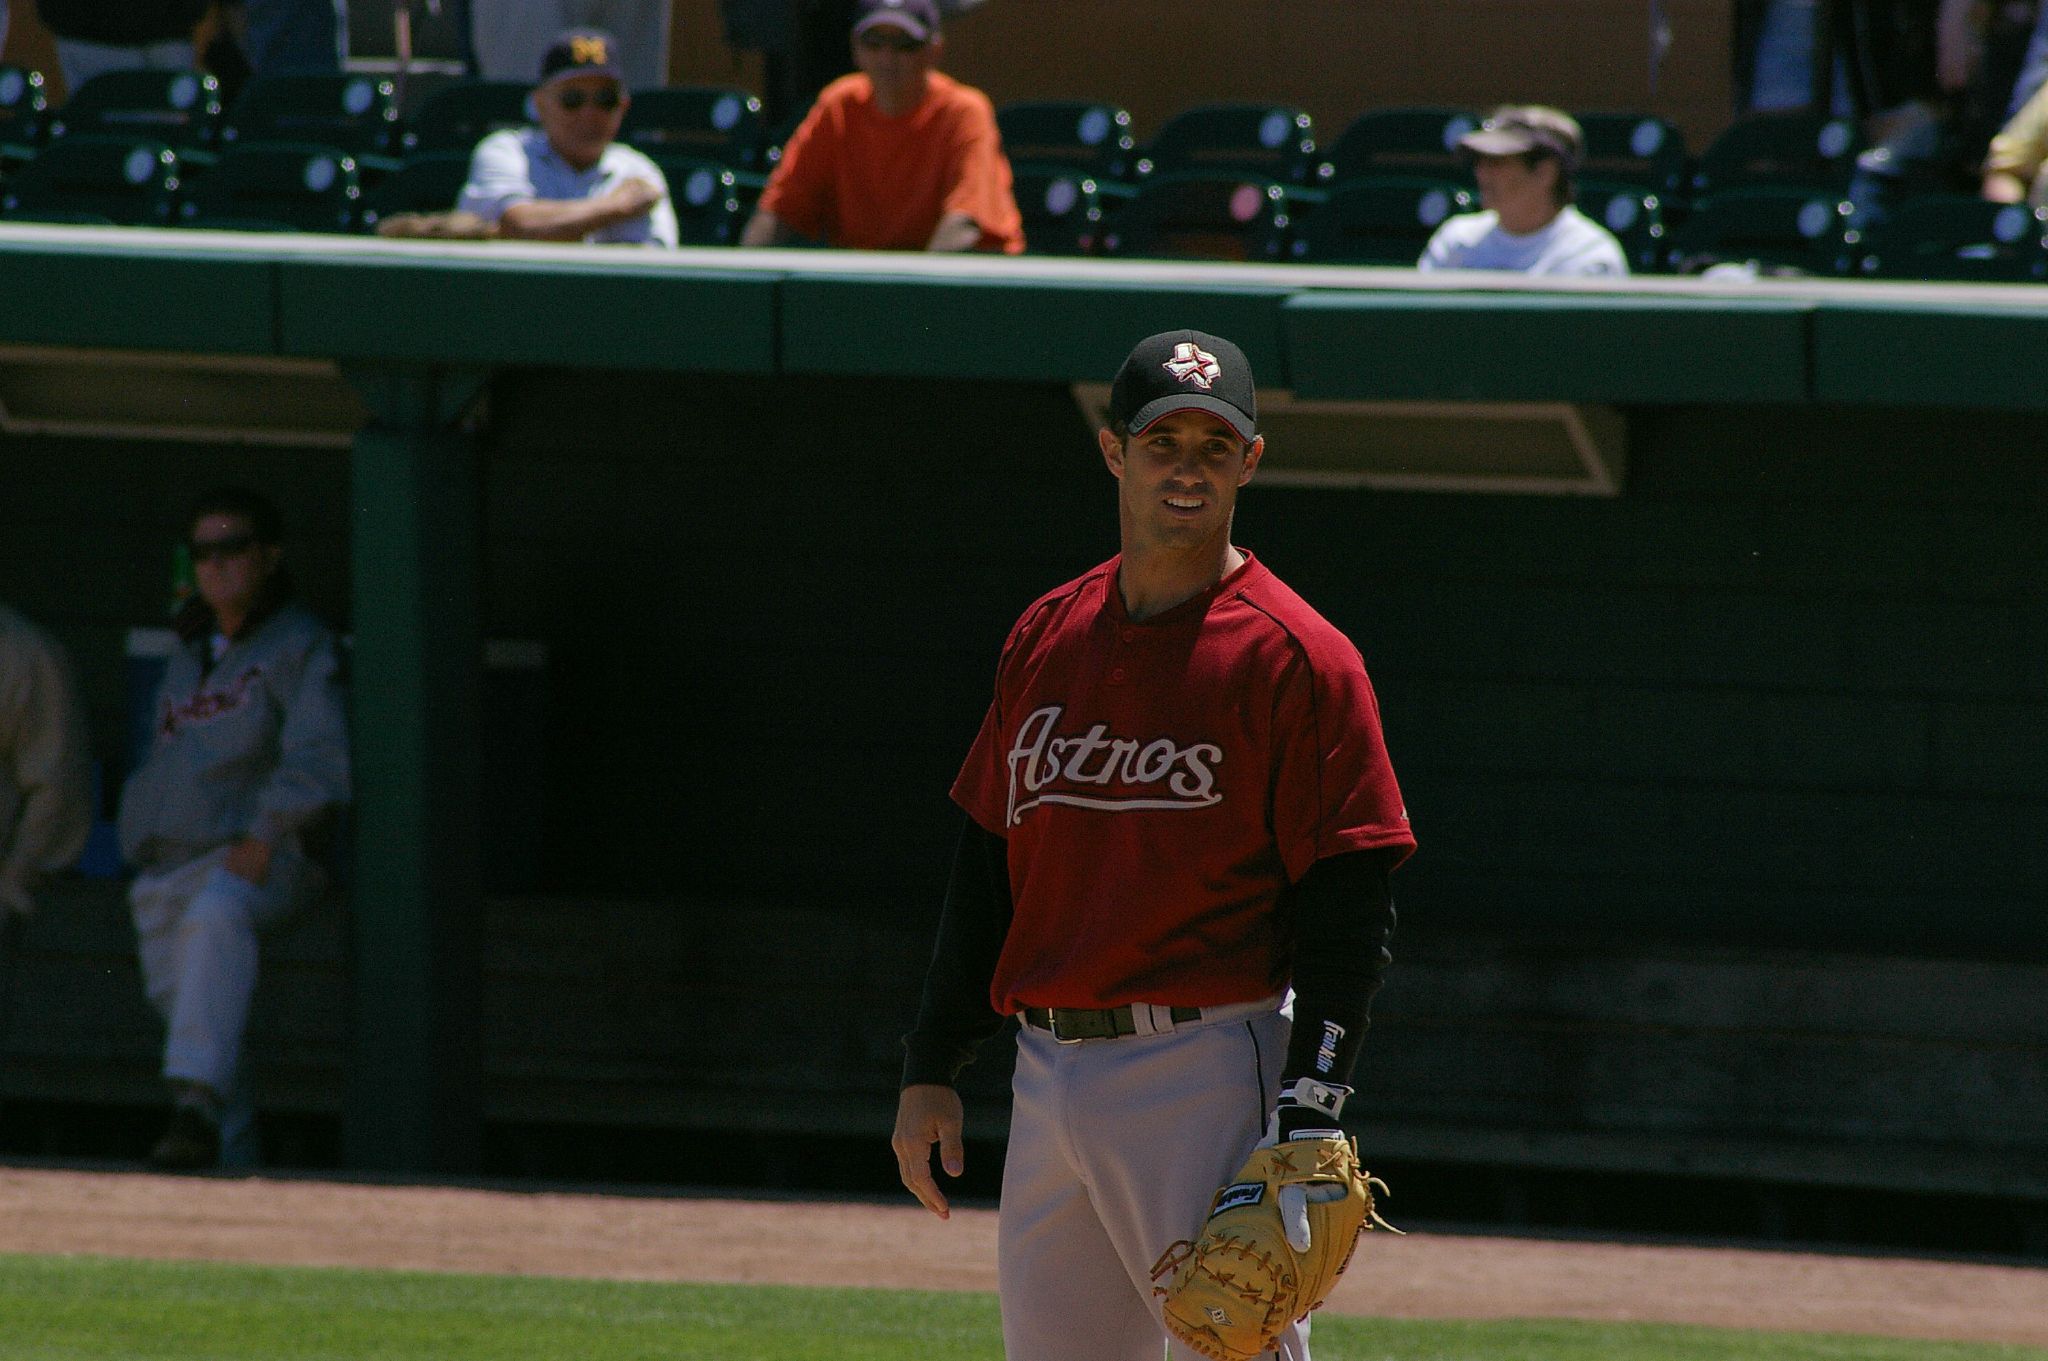 a man in a red jersey holds his baseball glove